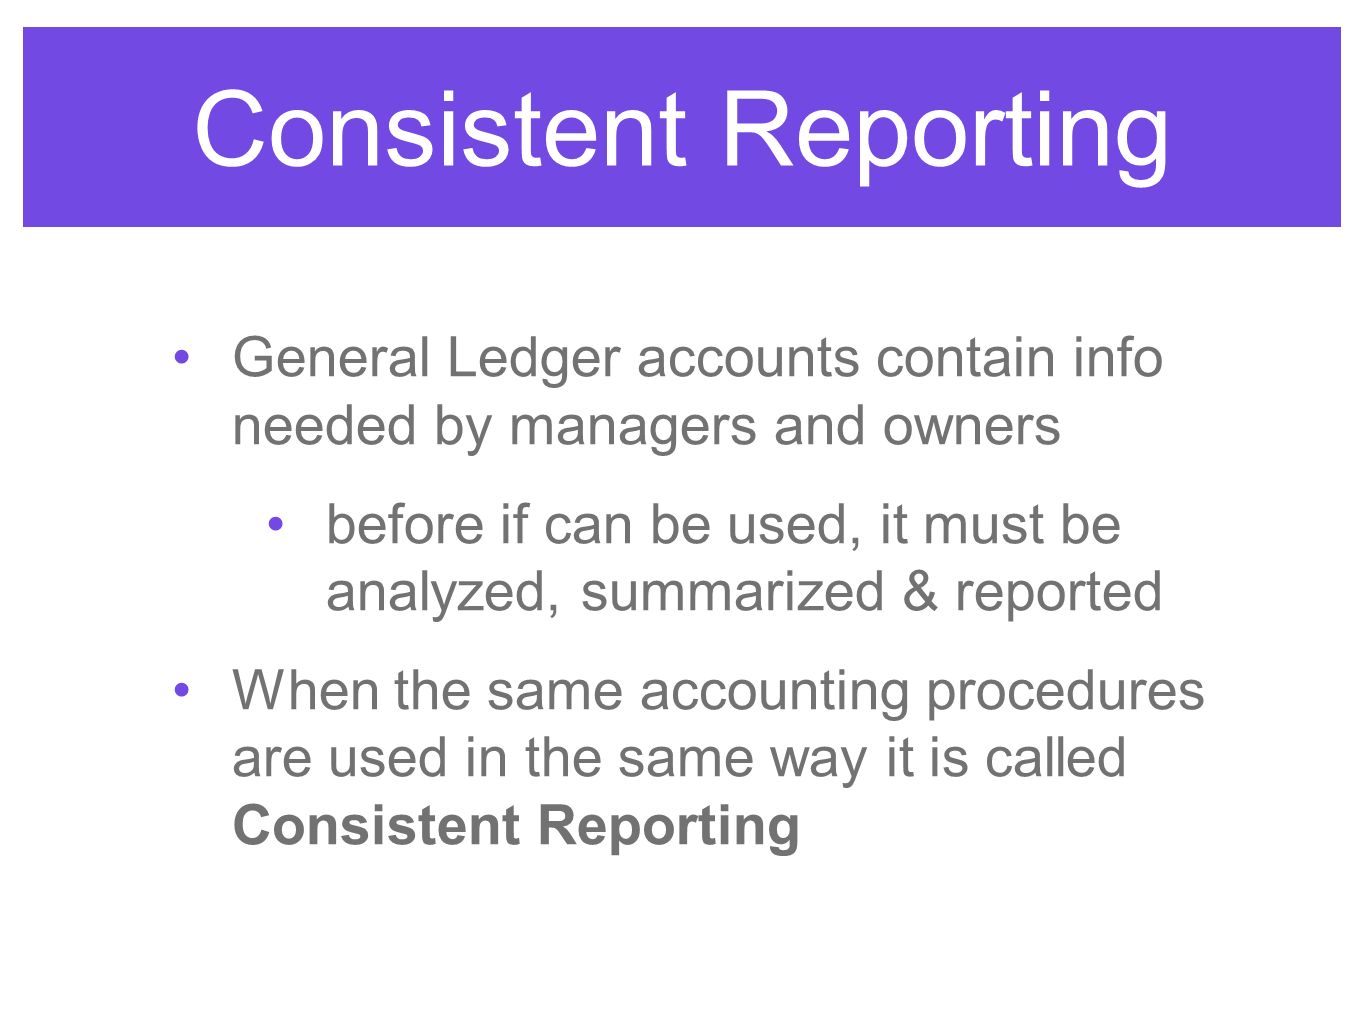 Consistent Reporting General Ledger accounts contain info needed by managers and owners.